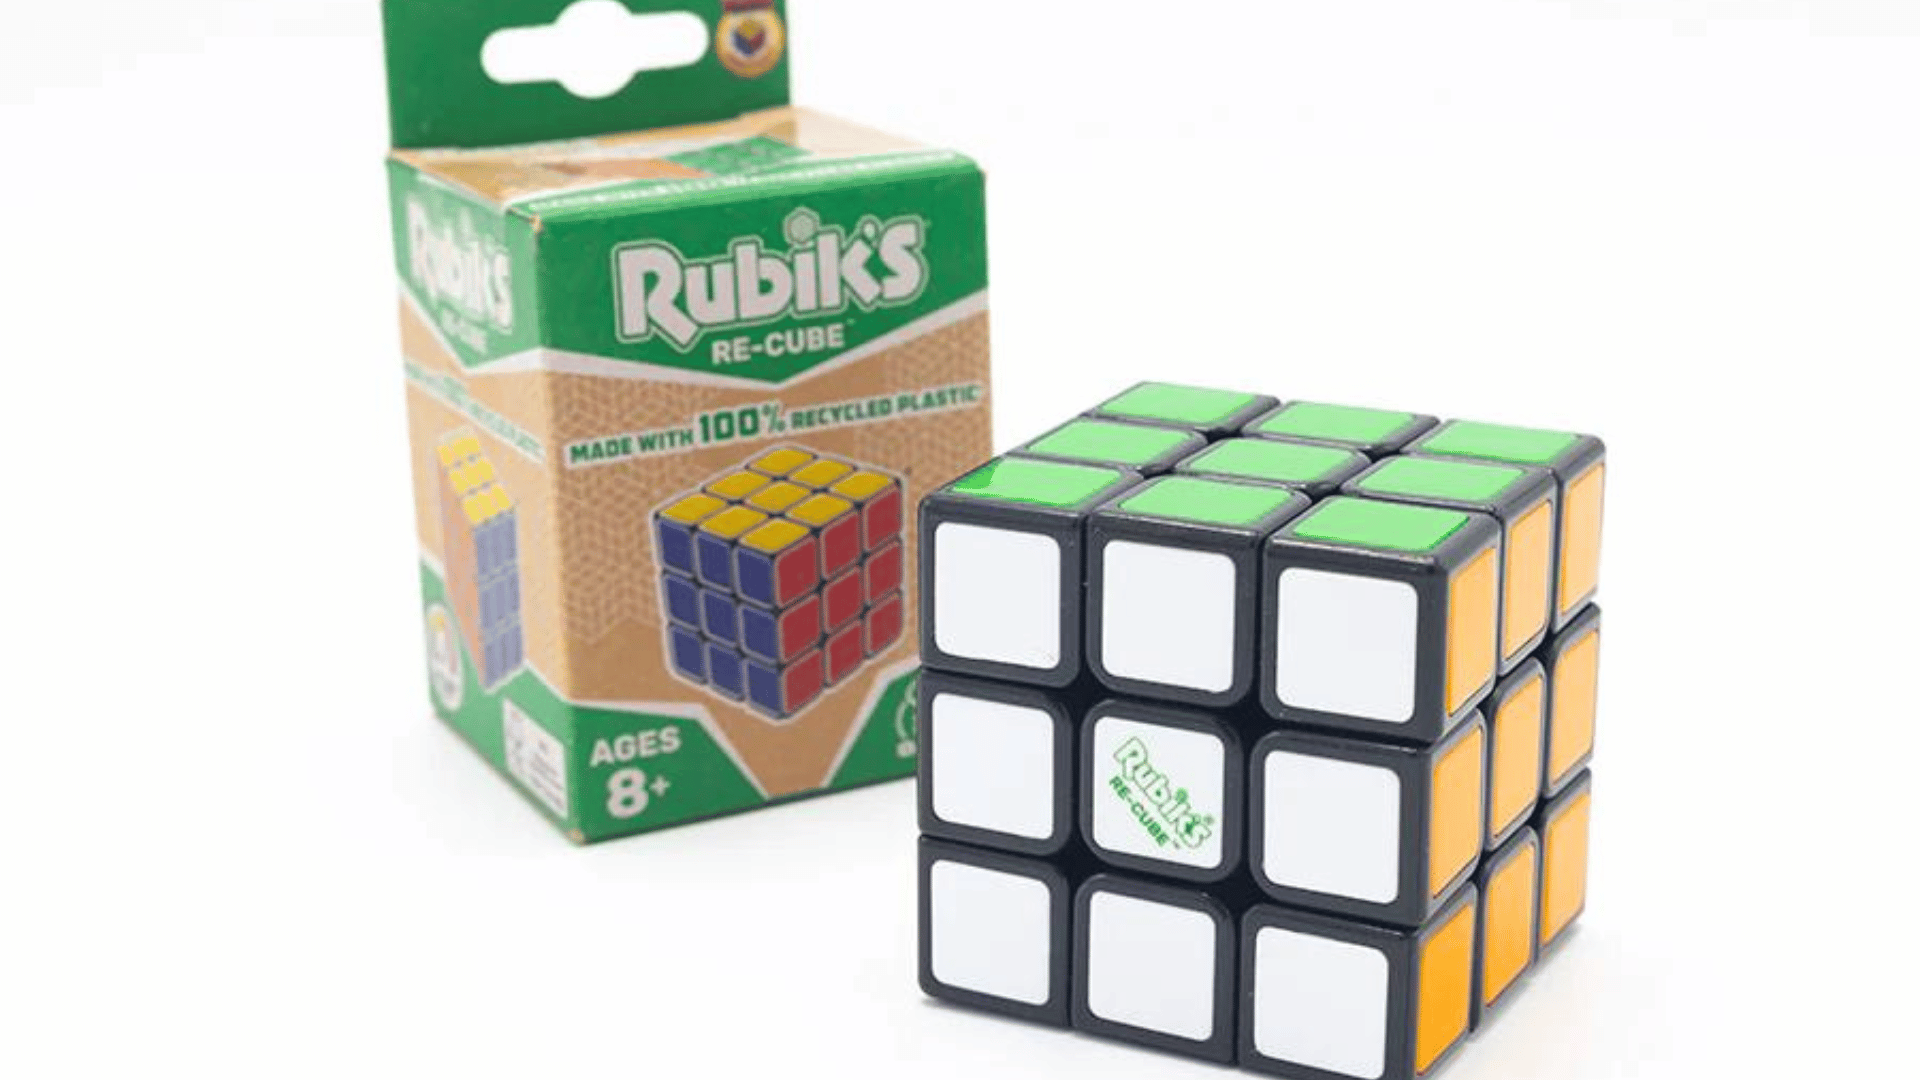 Rubik's Re-Cube Recyclable Sustainable Toys The Cubicle